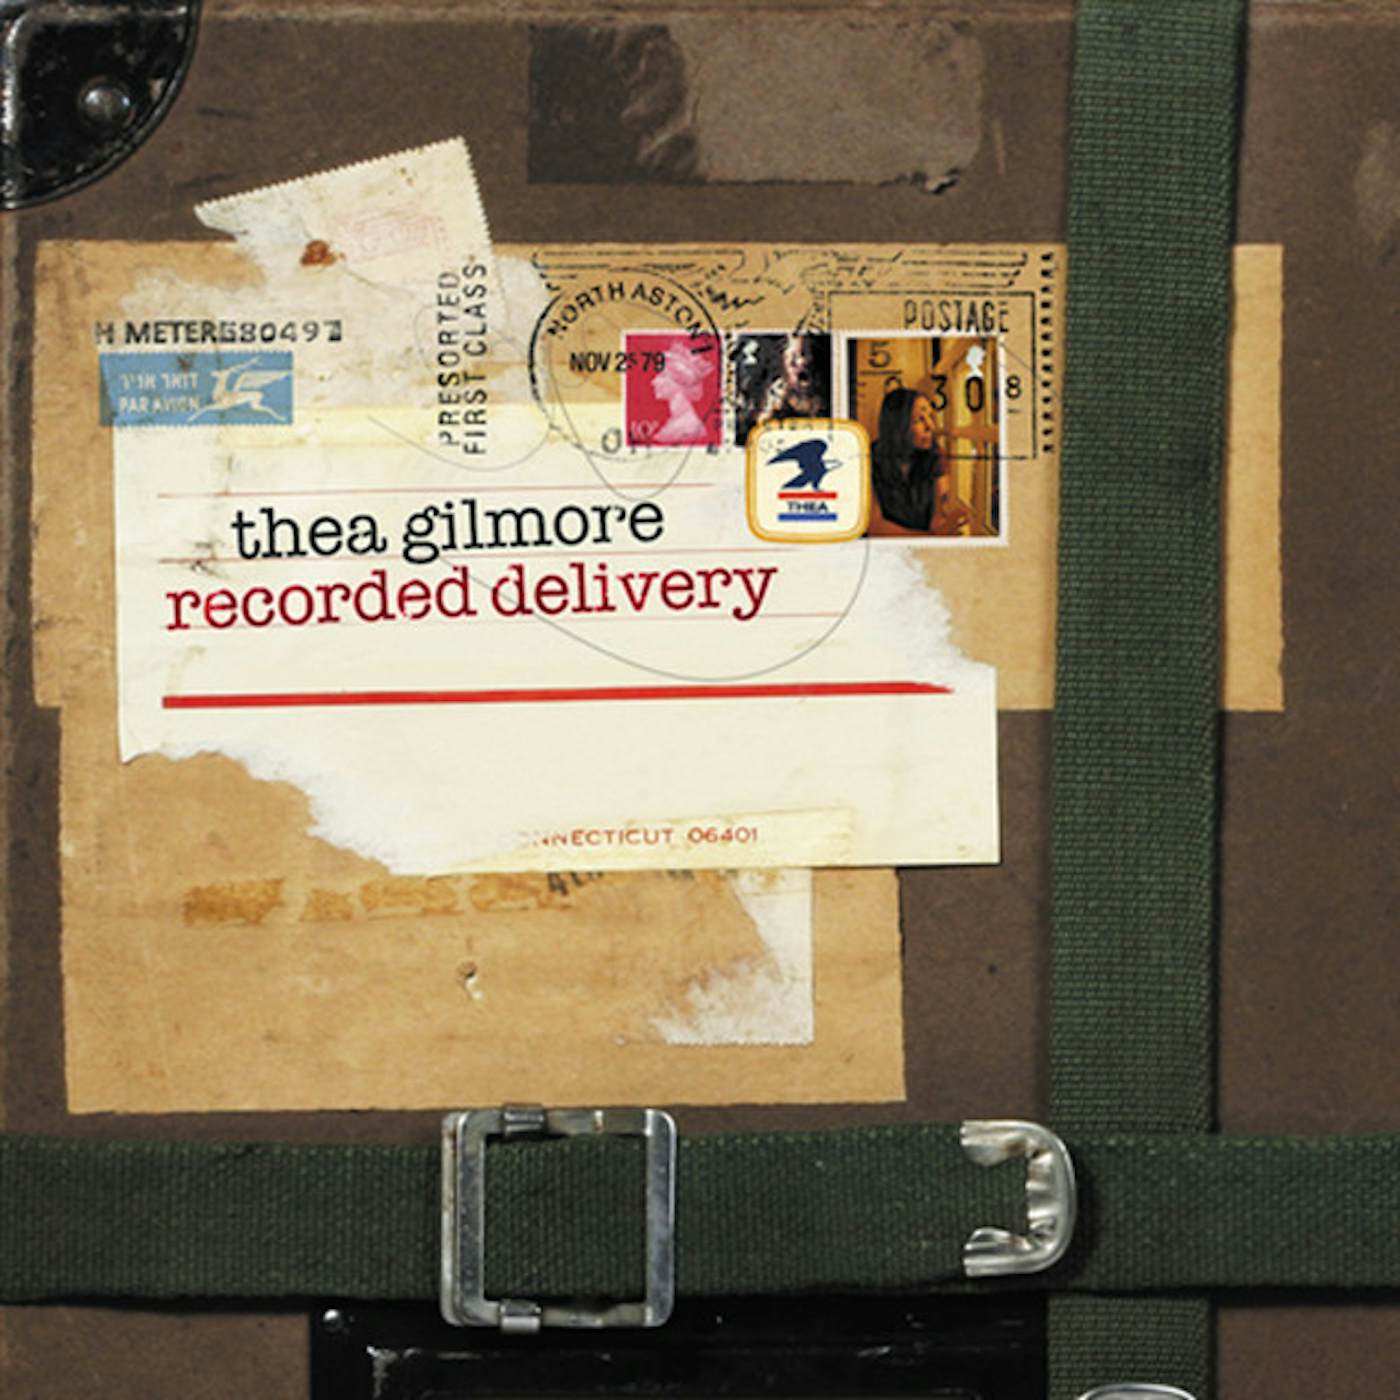 Thea Gilmore RECORDED DELIVERY CD